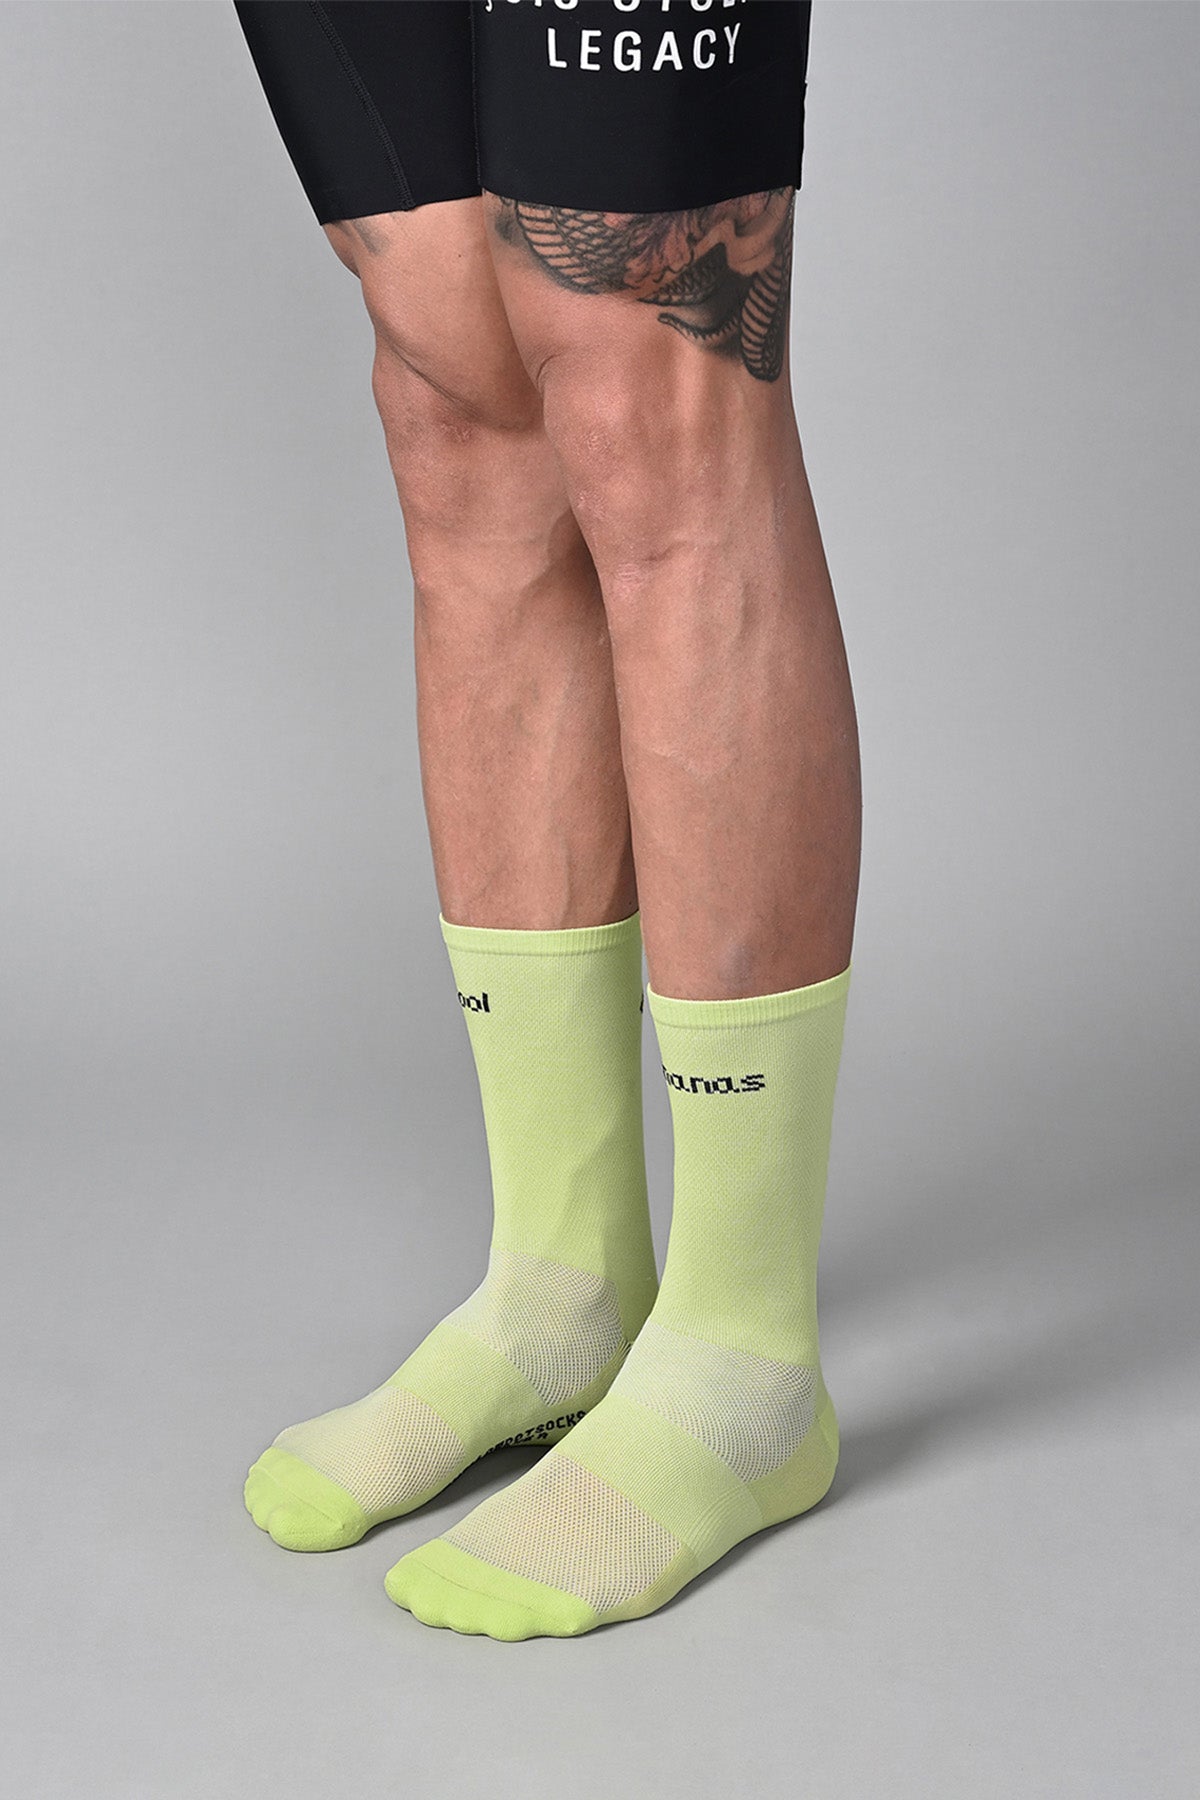 COOL BANANAS - BITTER LIME FRONT SIDE | BEST CYCLING SOCKS